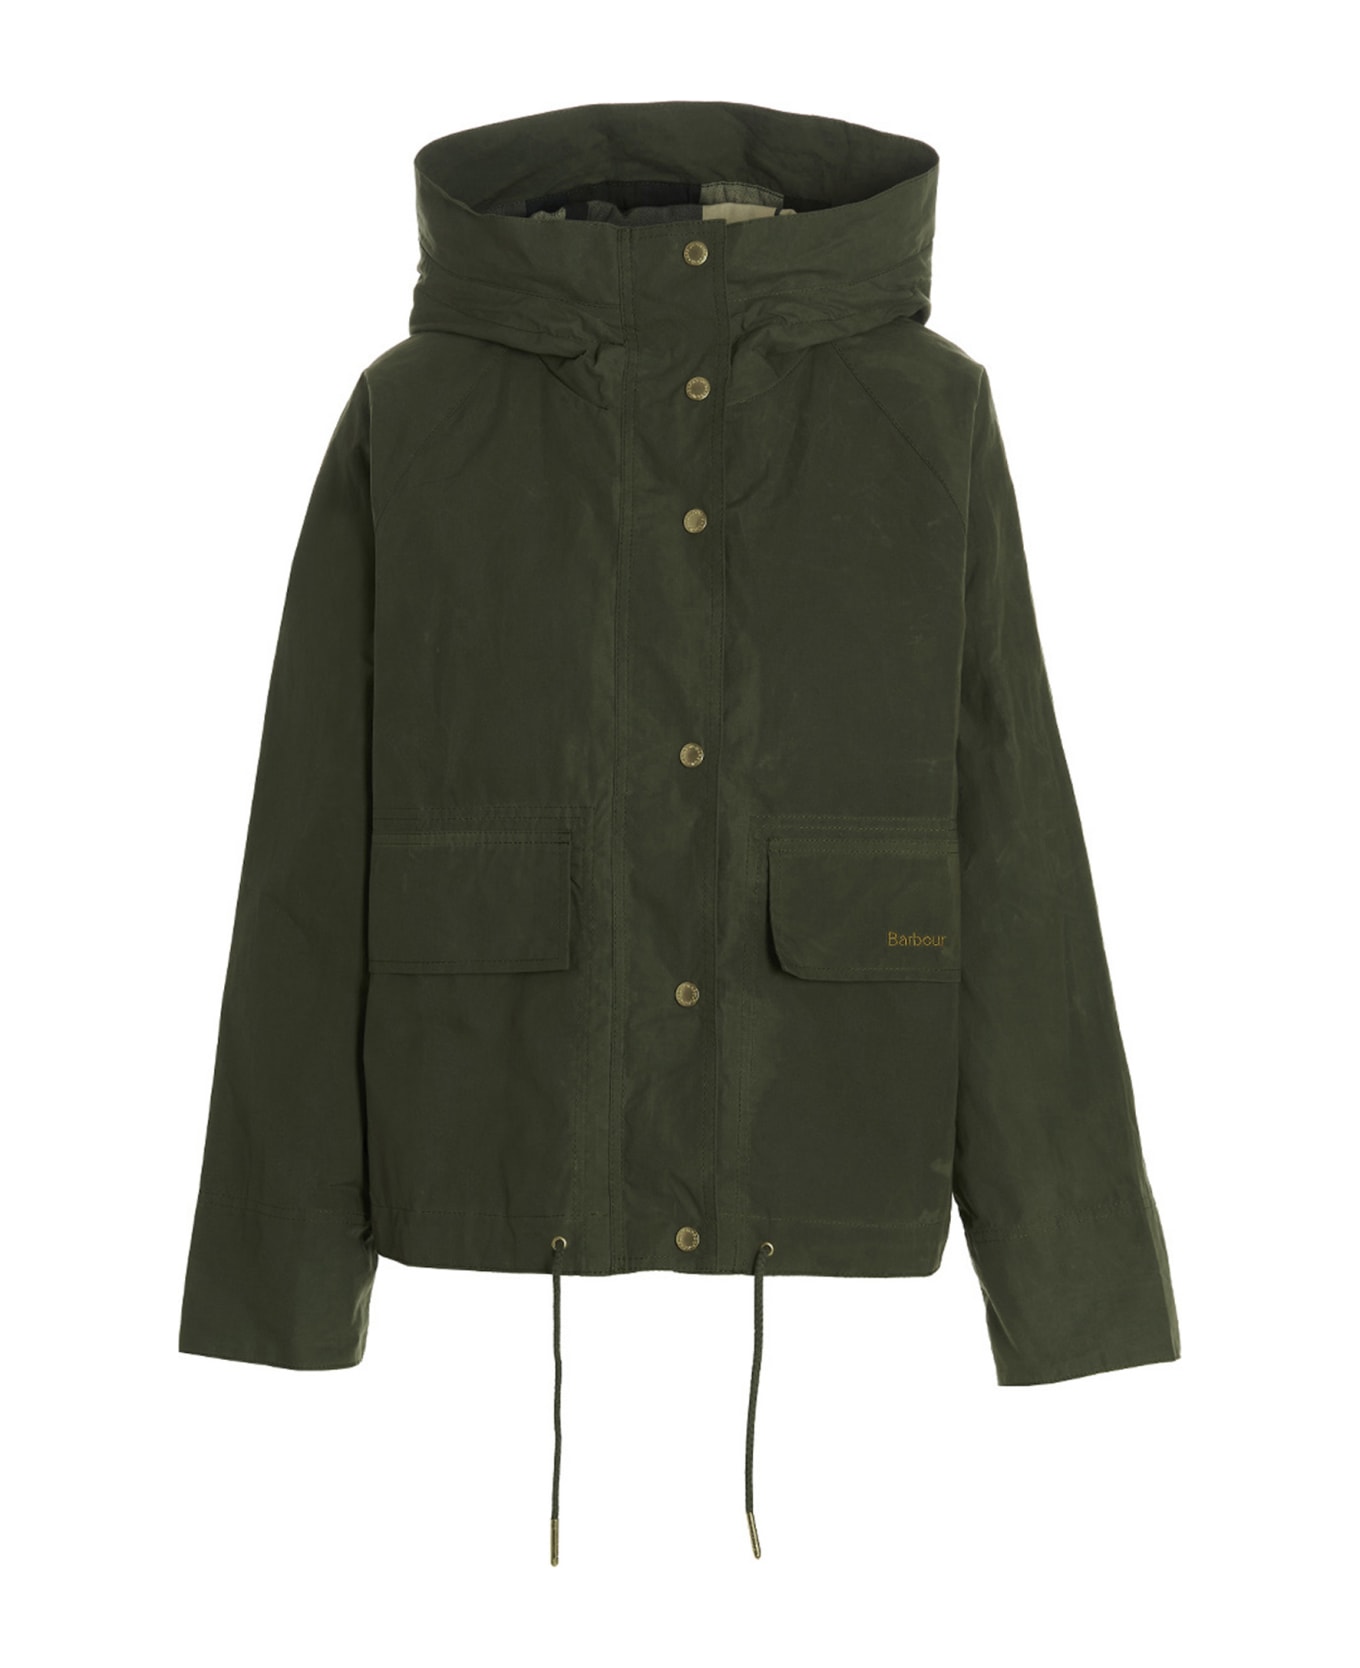 Barbour 'nith' Jacket - Green